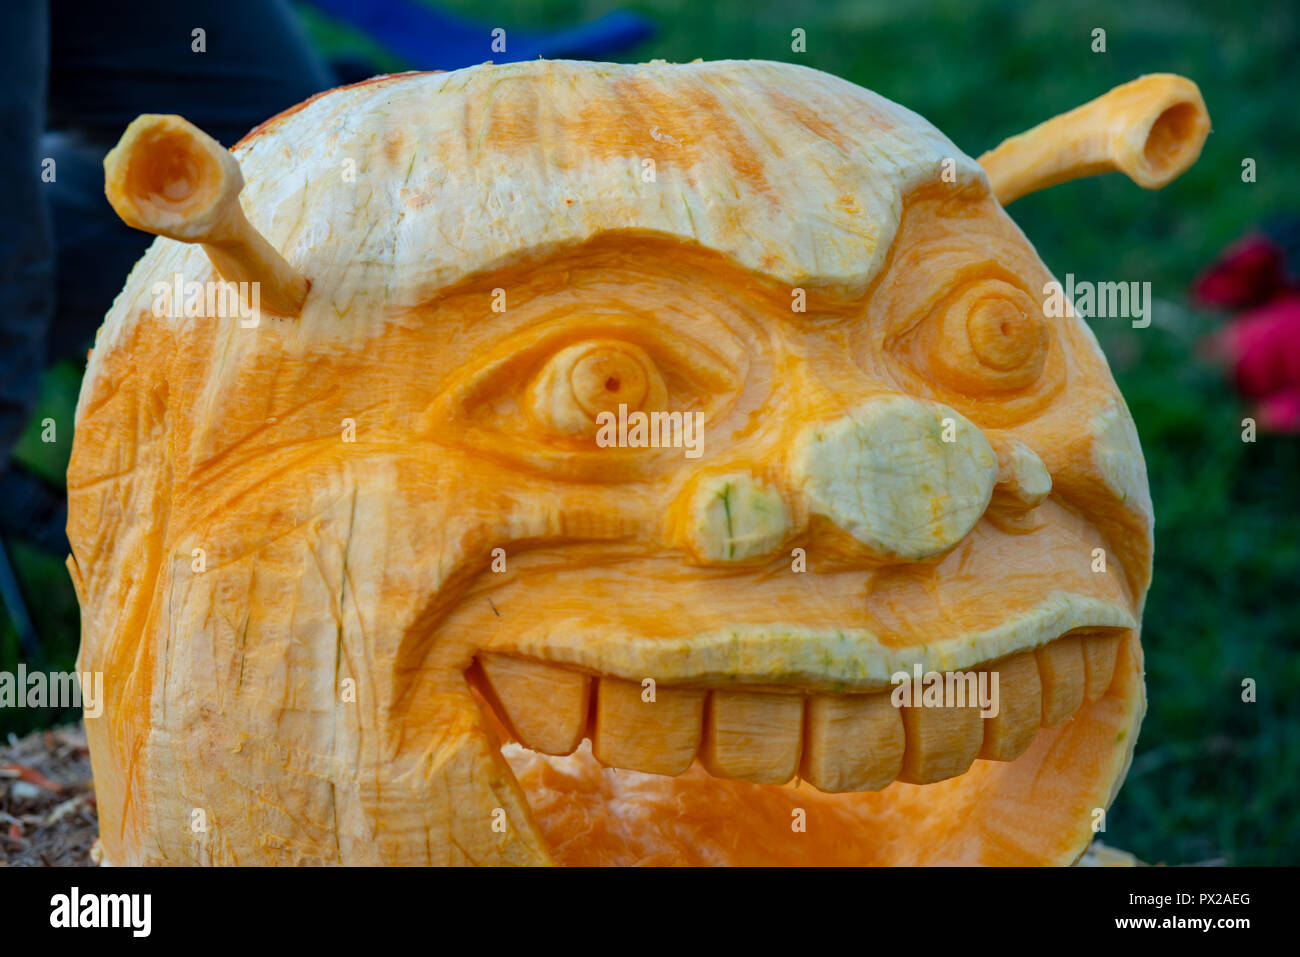 CHADDS FORD, PA - OCTOBER 18: View of Shrek The Great Pumpkin Carve carving contest on October 18, 2018 Stock Photo